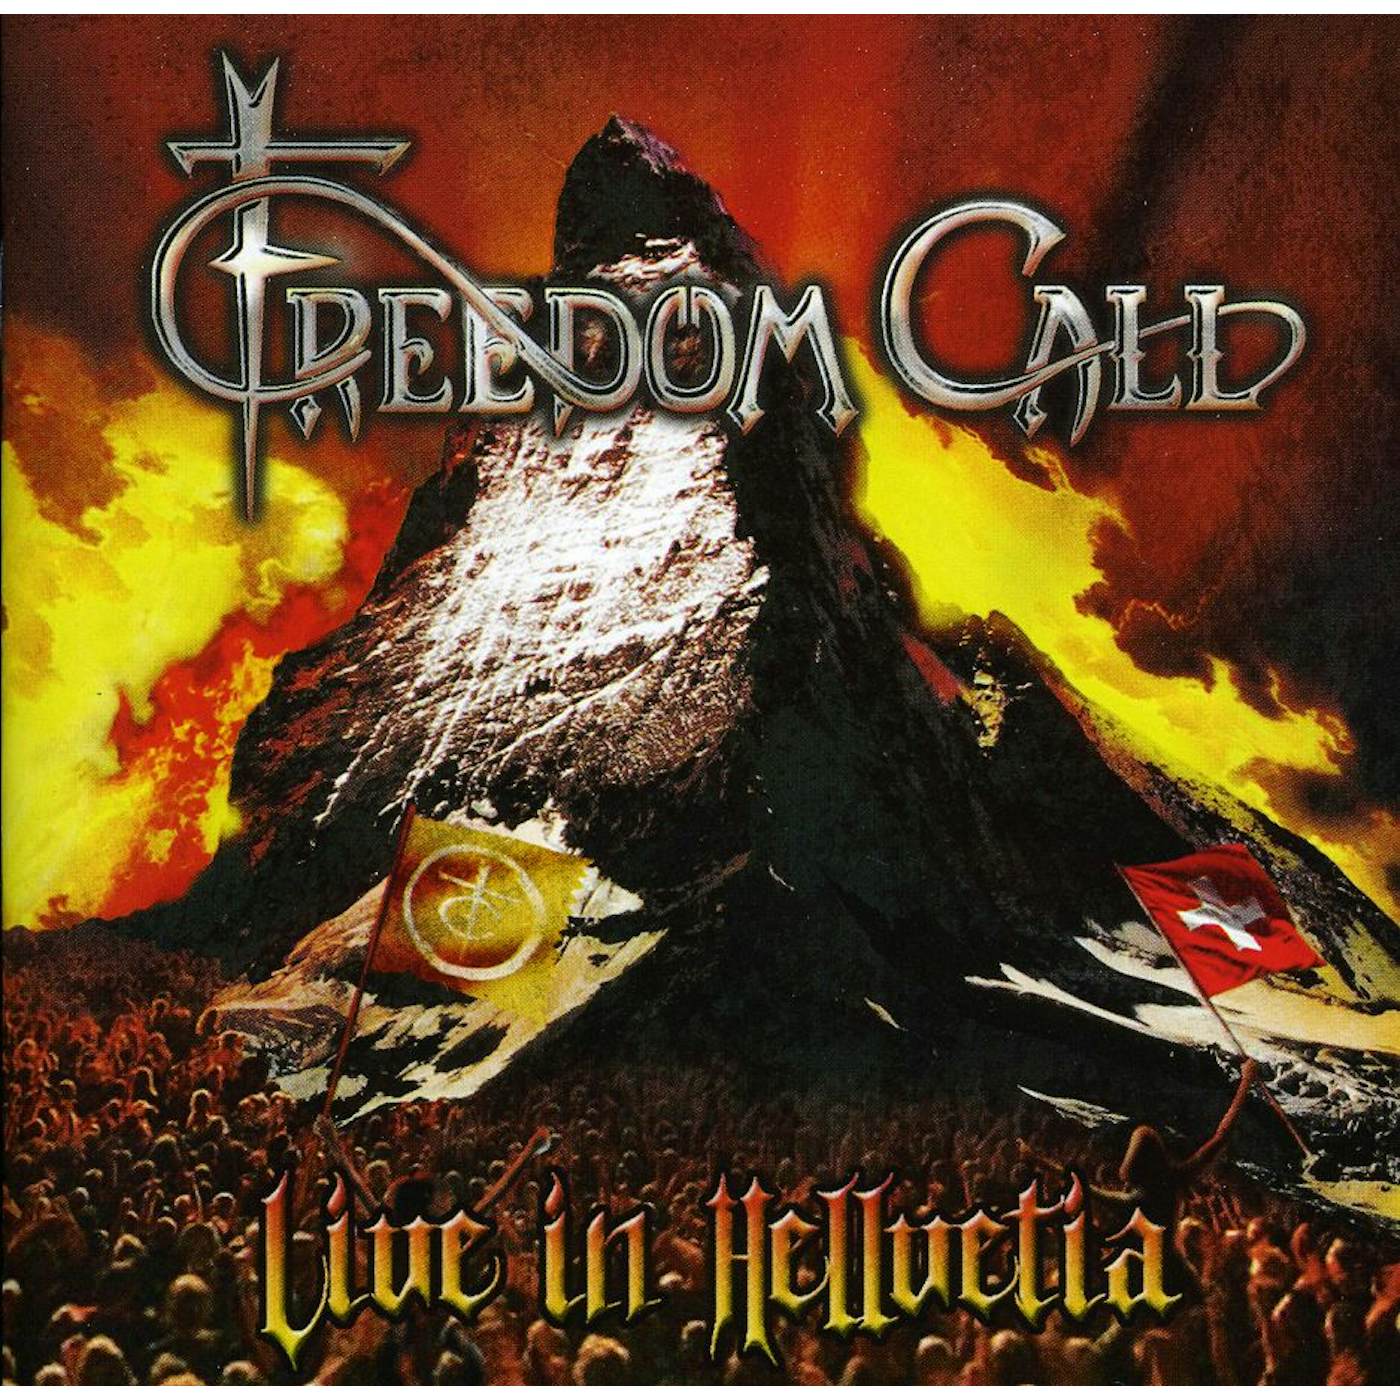 Freedom Call LIVE IN HELLVETIA CD